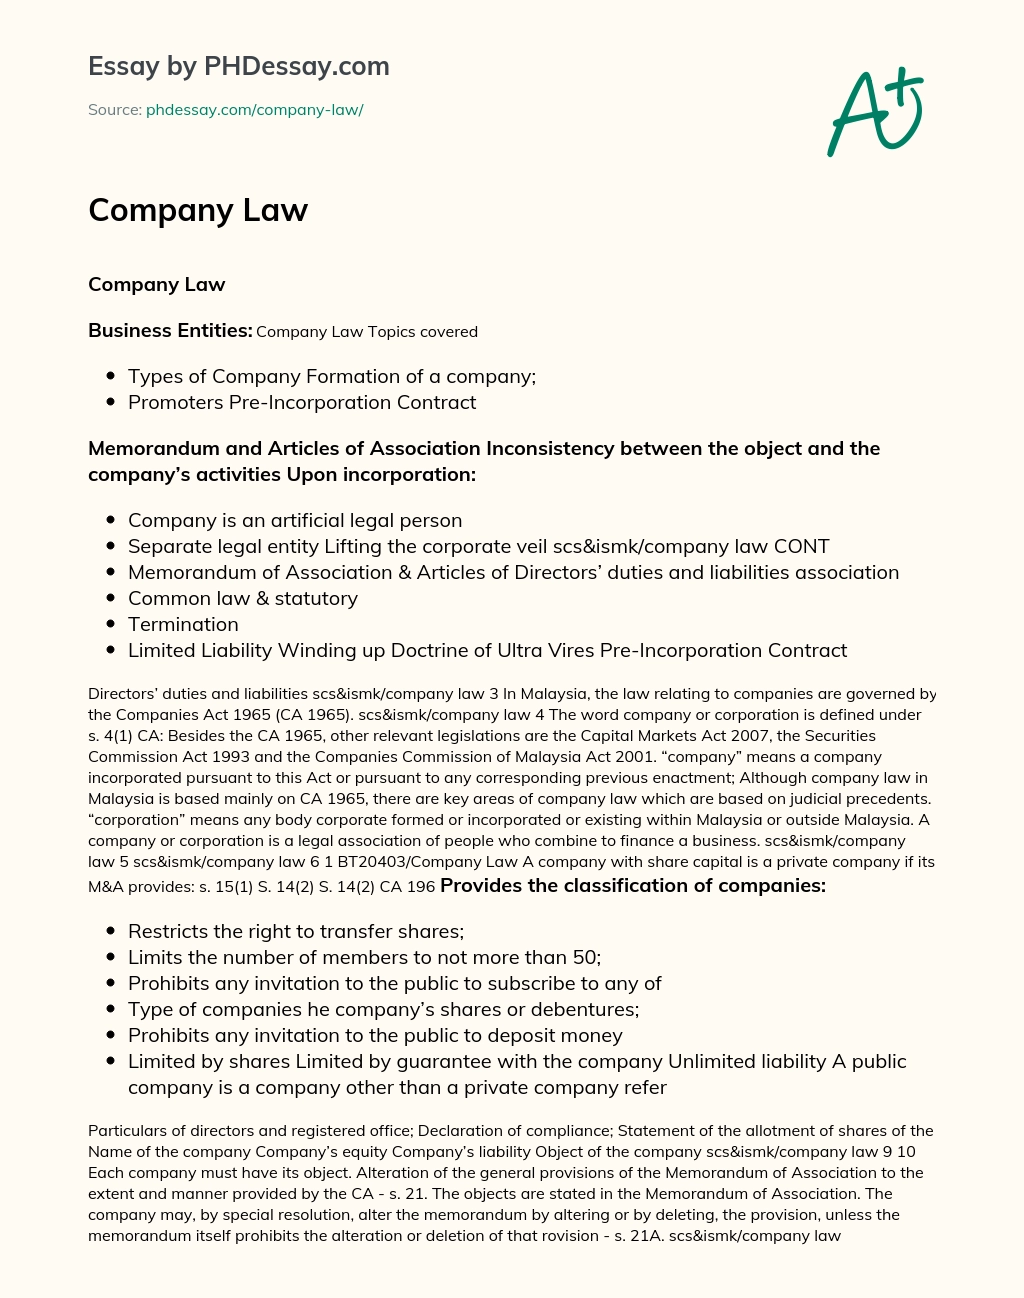 Overview of Company Law in Malaysia: Key Topics and Legislation essay